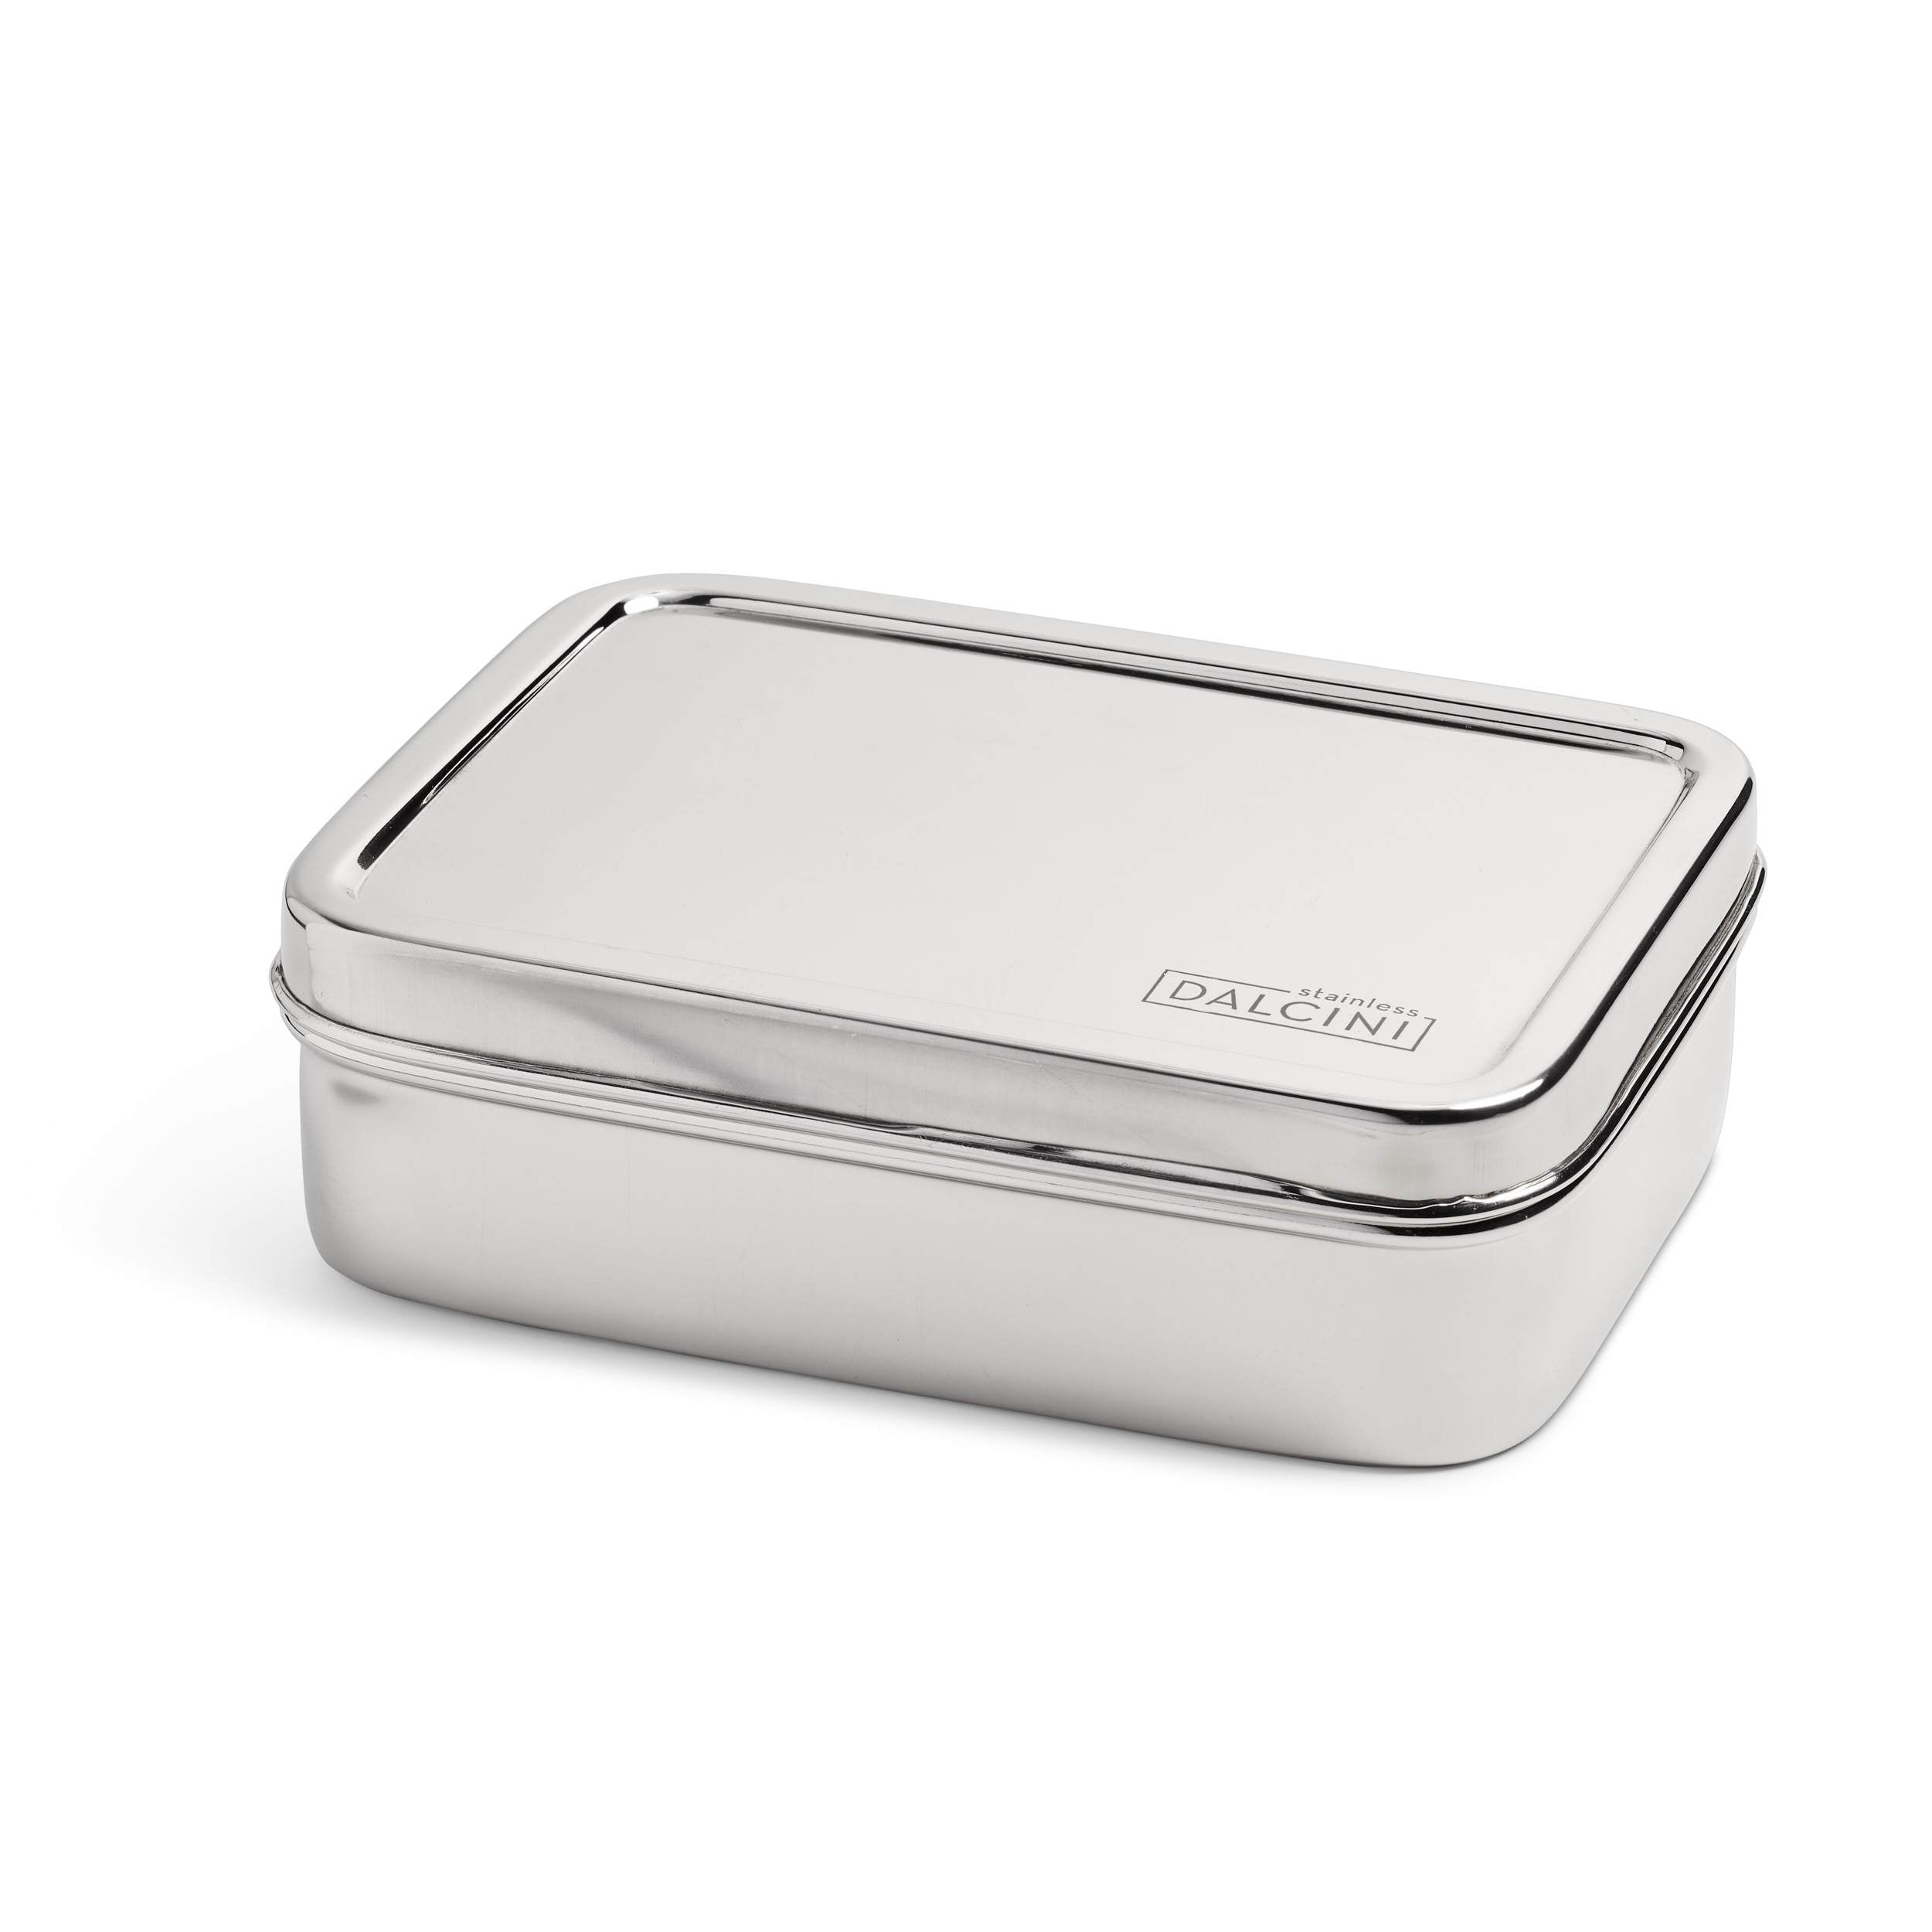 Dalcini Stainless Stainless Steel Bistro Lunch Box